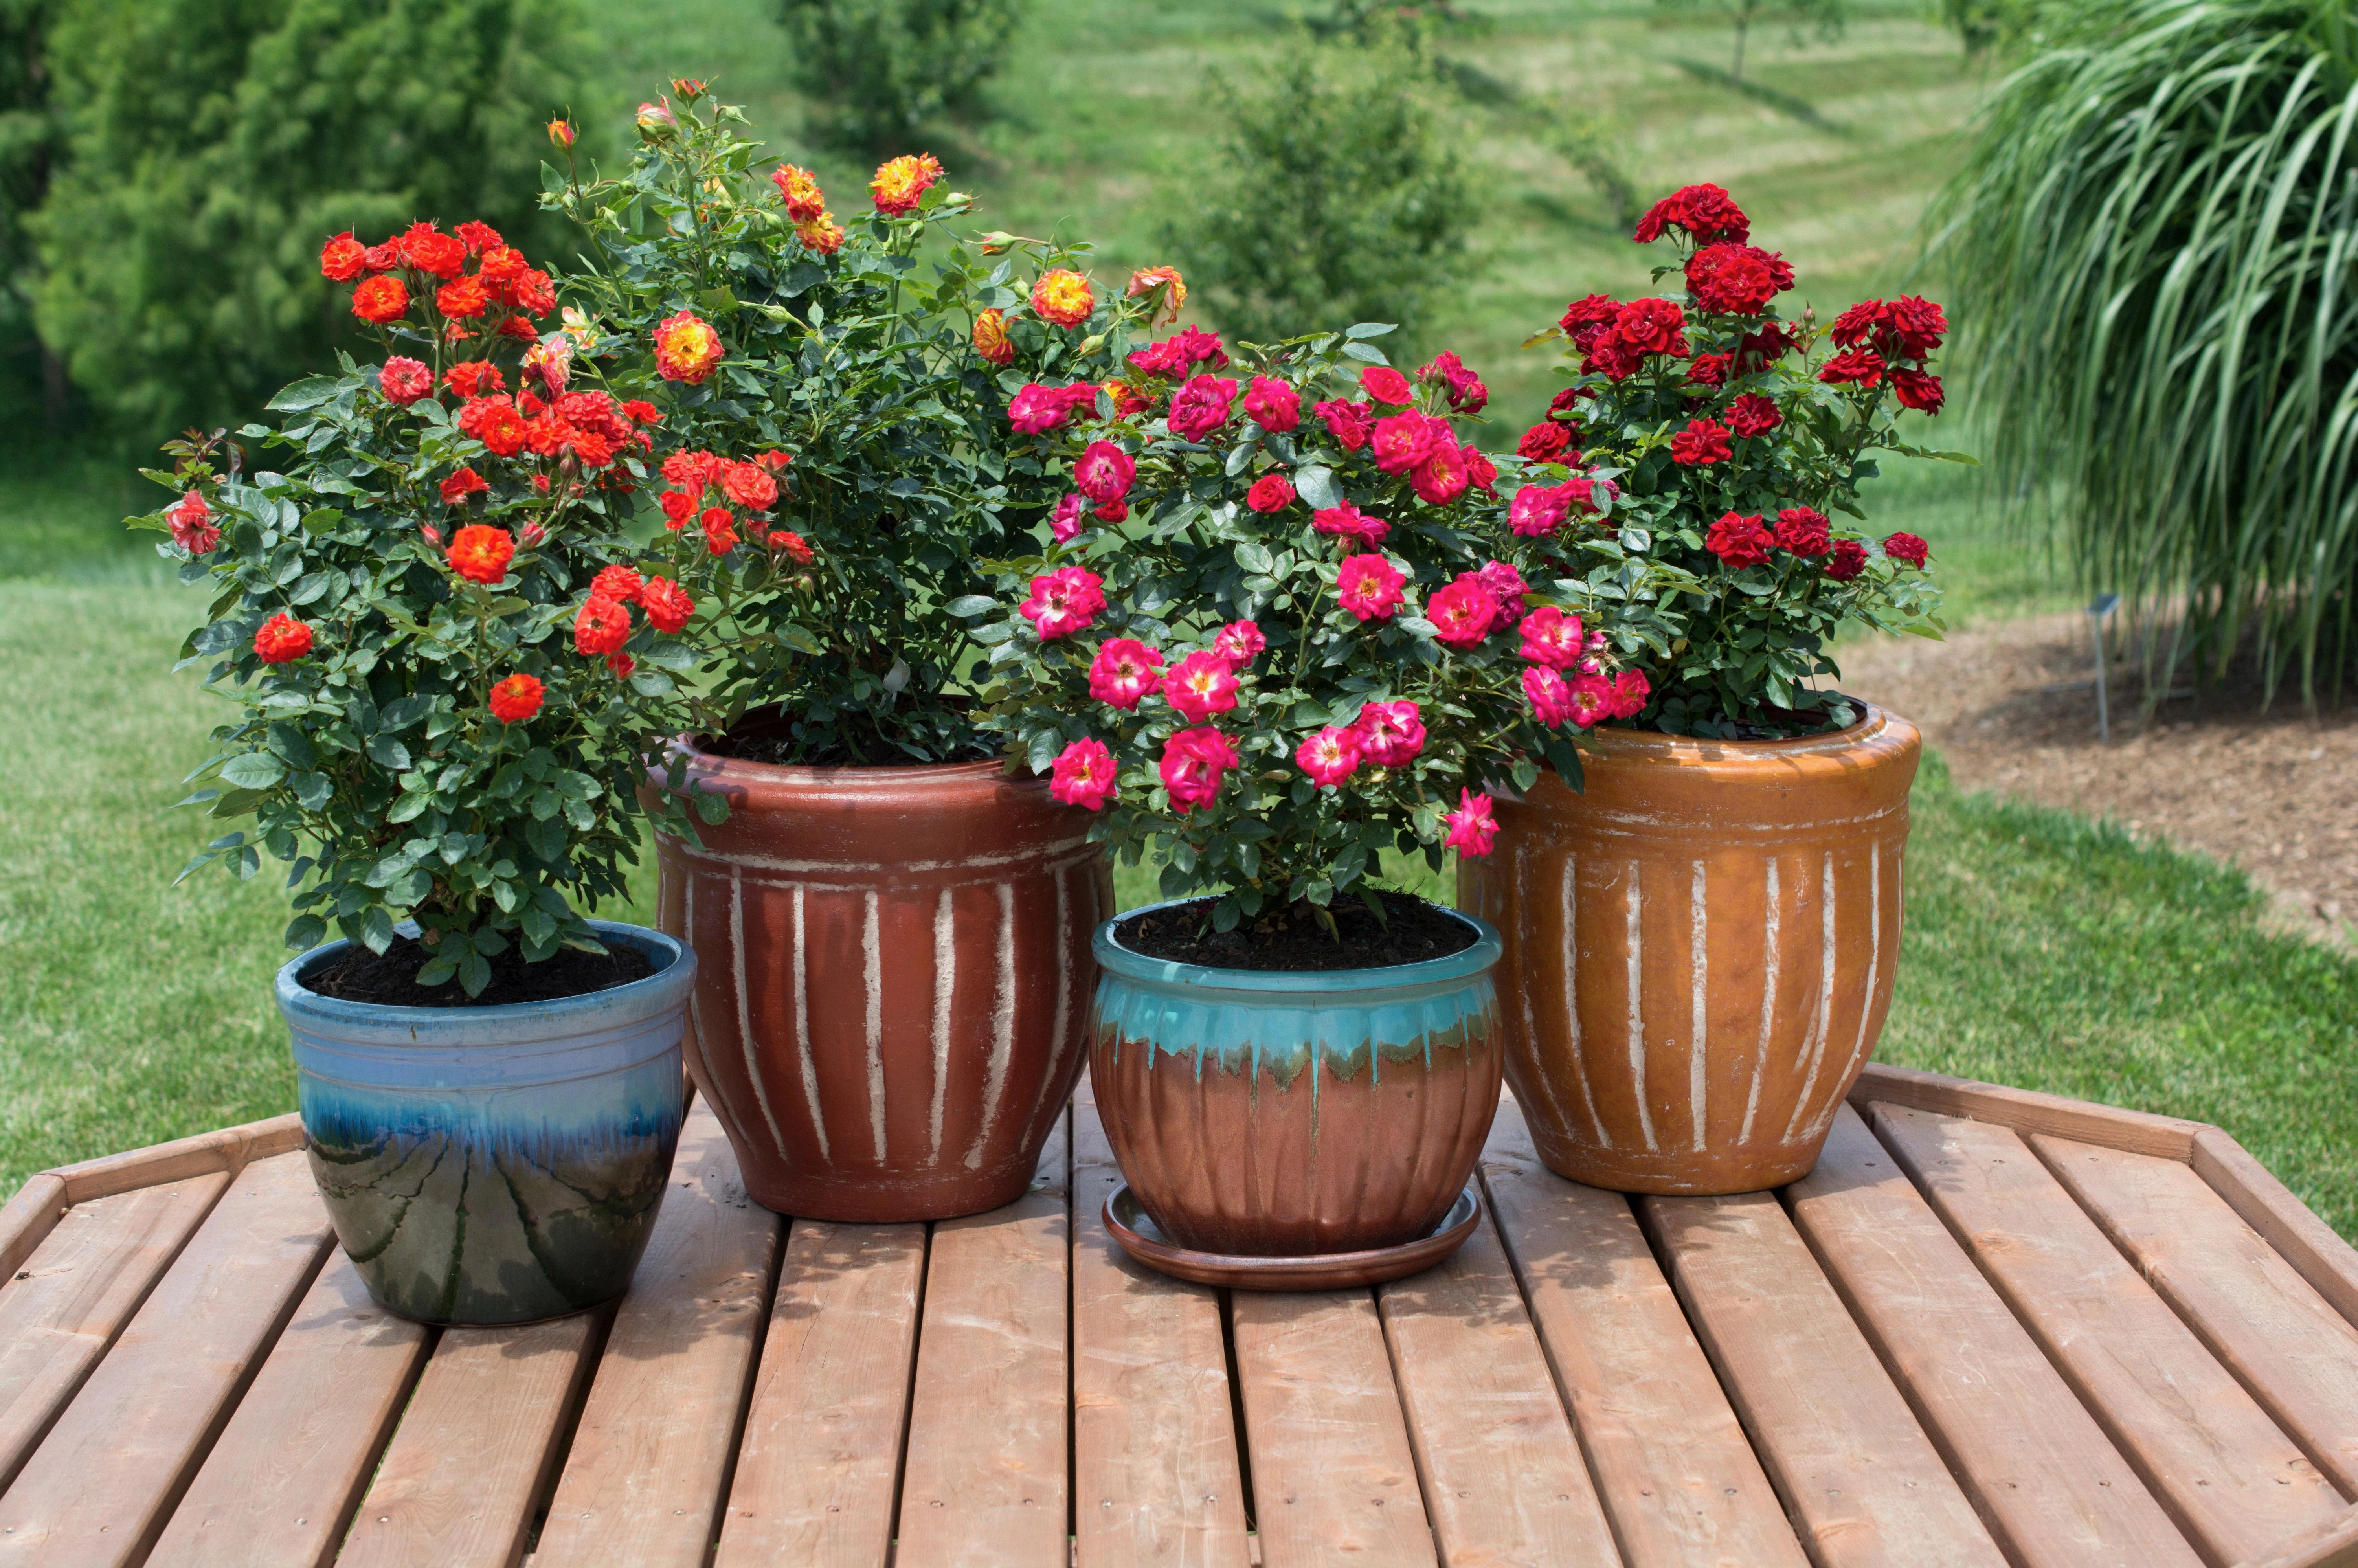 roses in containers on patio